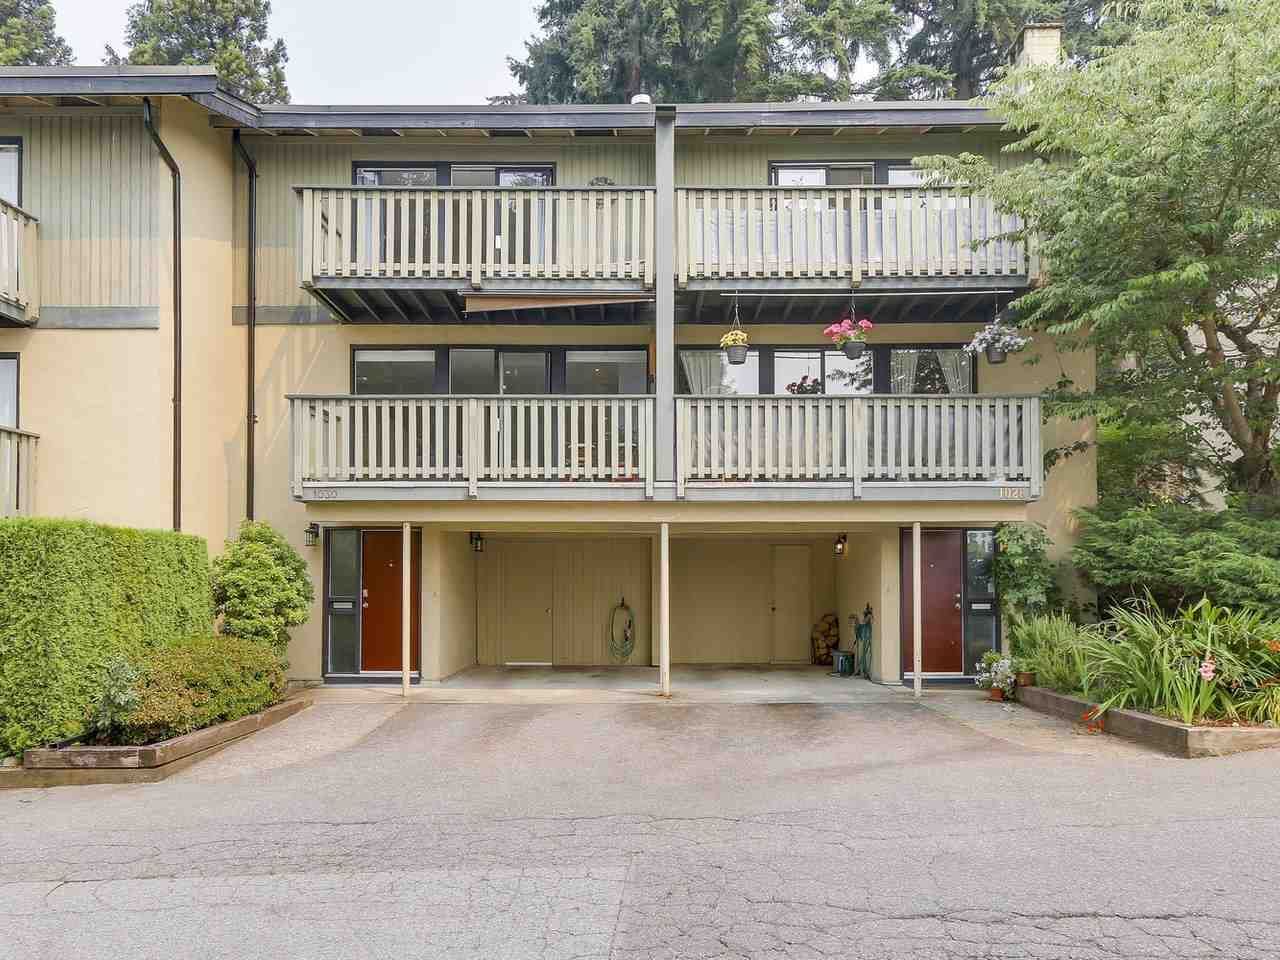 Main Photo: Map location: 1030 LILLOOET ROAD in North Vancouver: Lynnmour Townhouse for sale : MLS®# R2195623